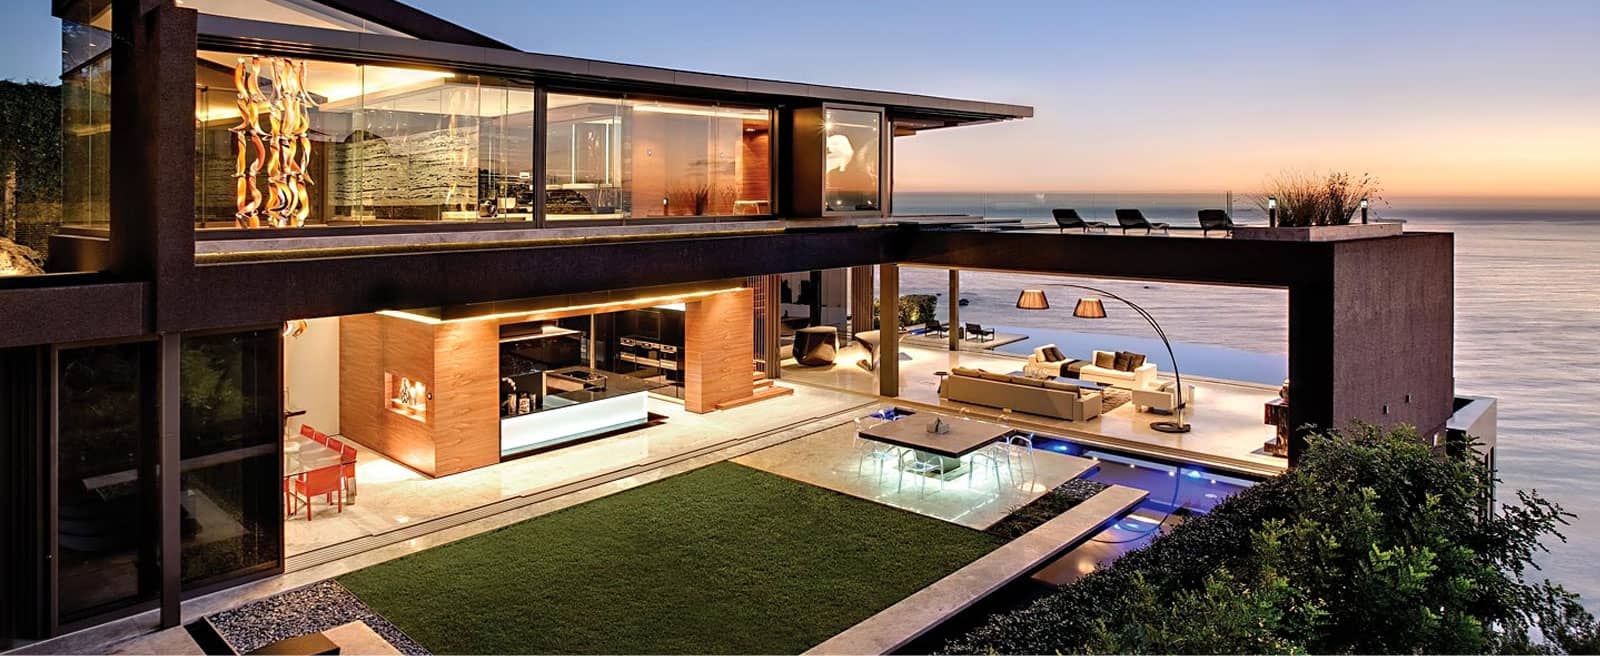 Waterfront luxury homes